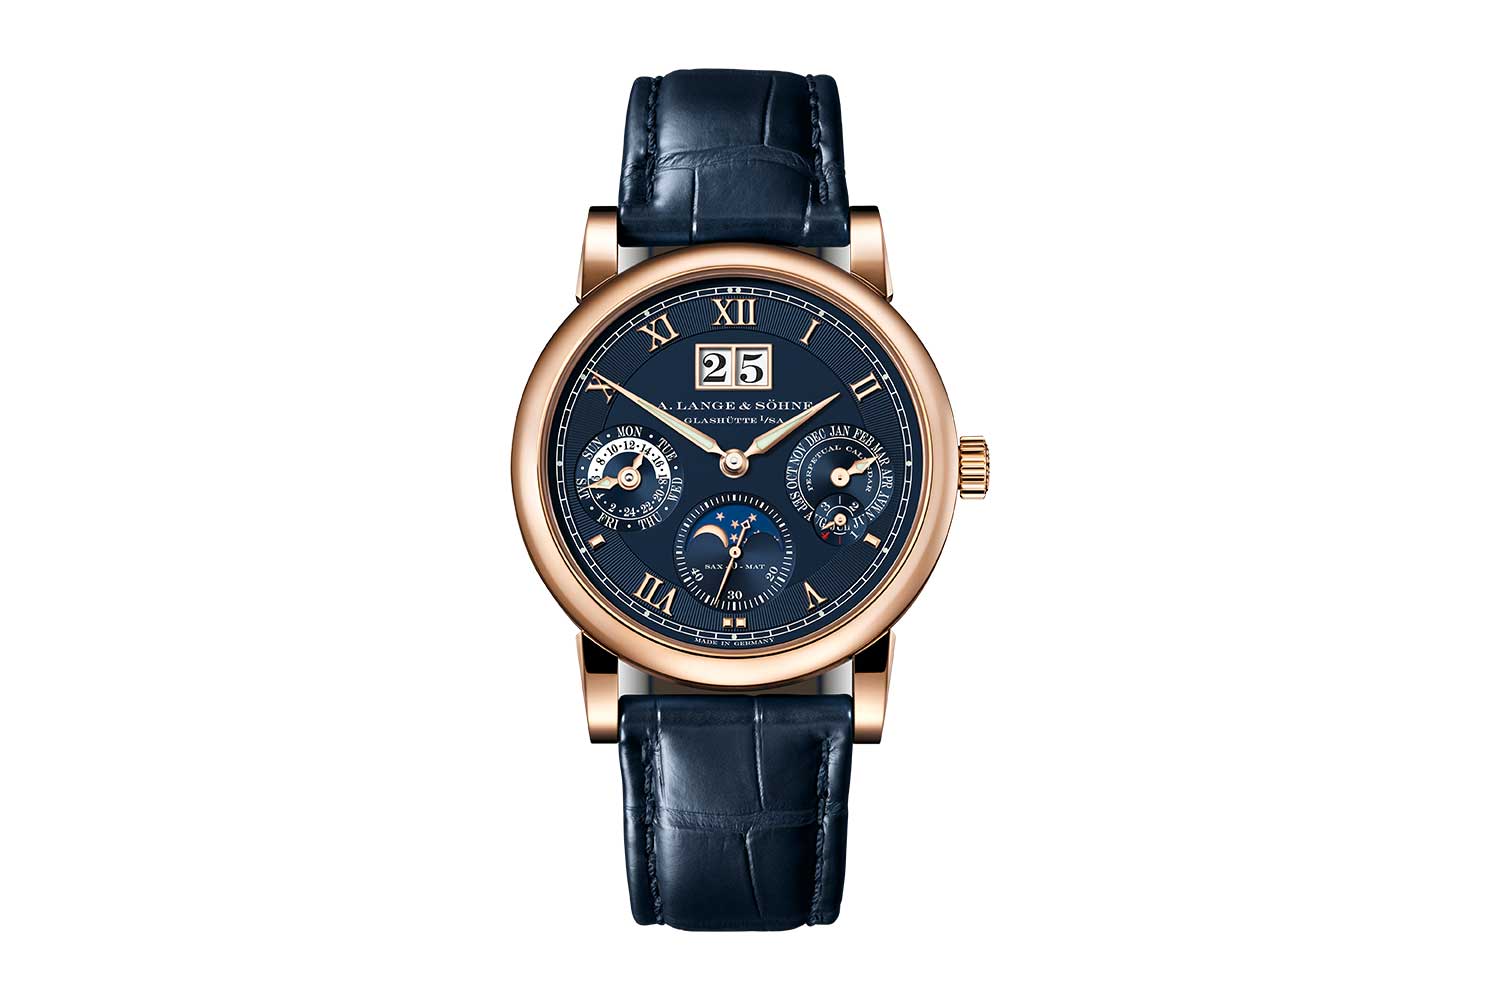 The 2021 Langematik Perpetual in pink gold with blue dial – ref. 310.037, limited to 50 pieces